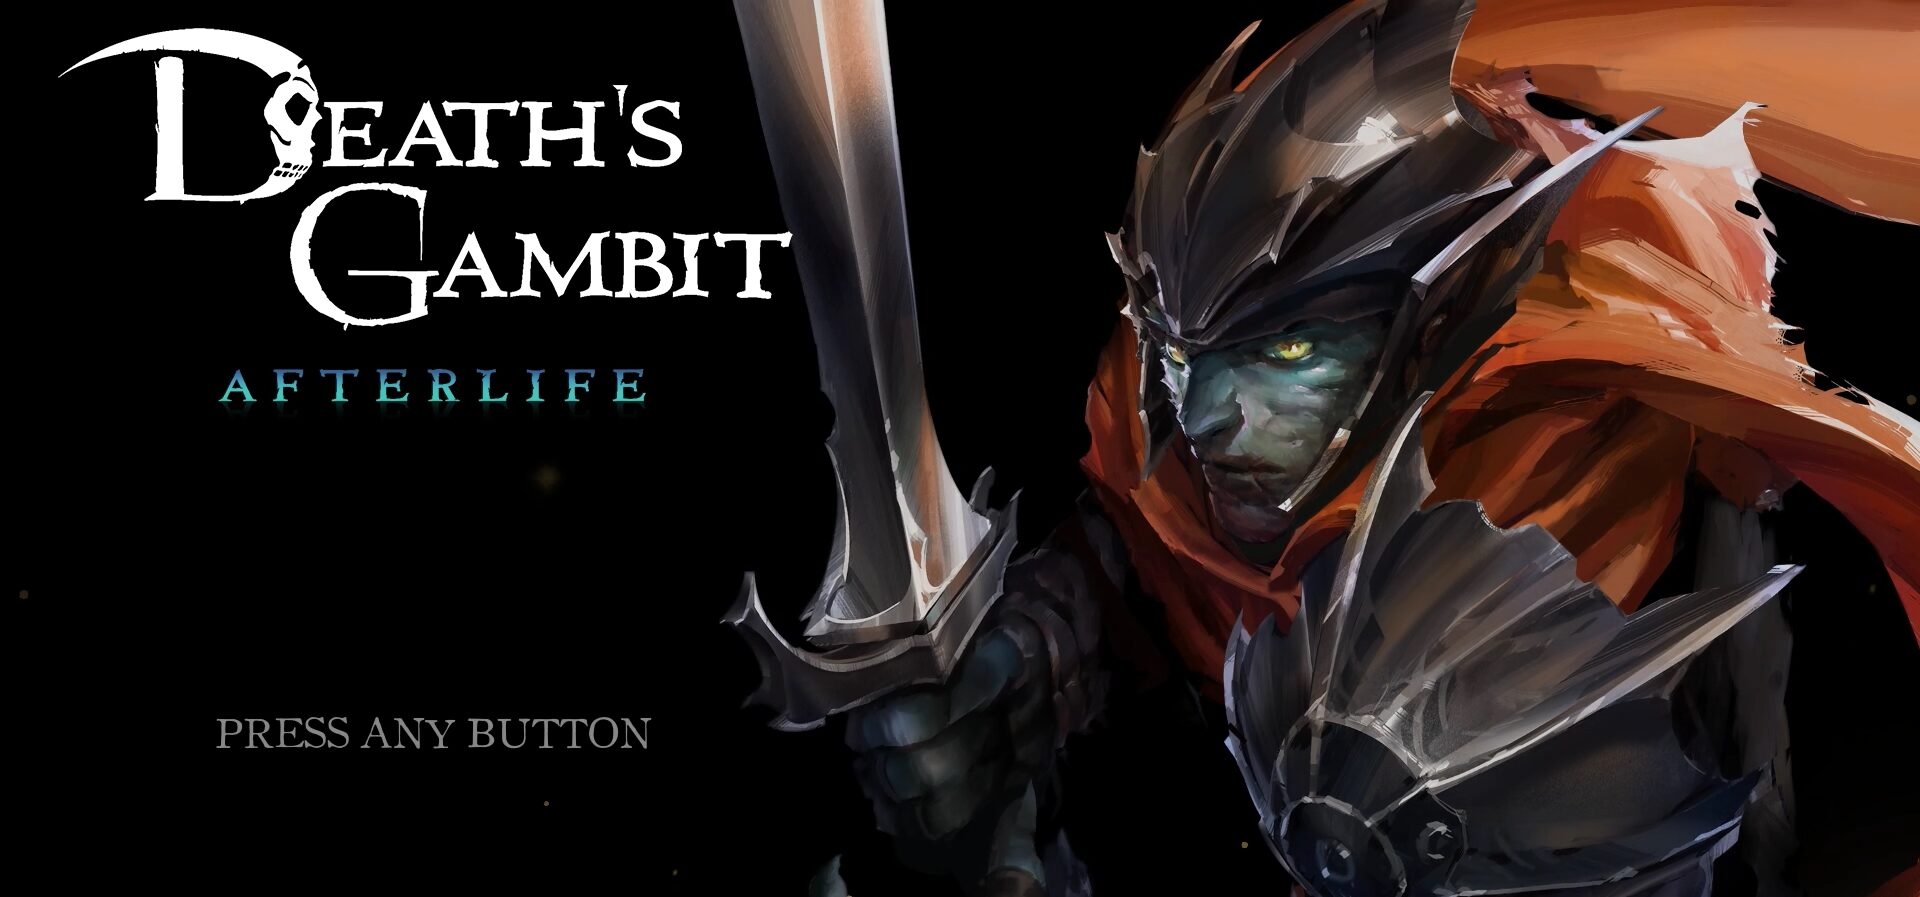 Death's Gambit: Afterlife Review - The High Cost of Immortal Living